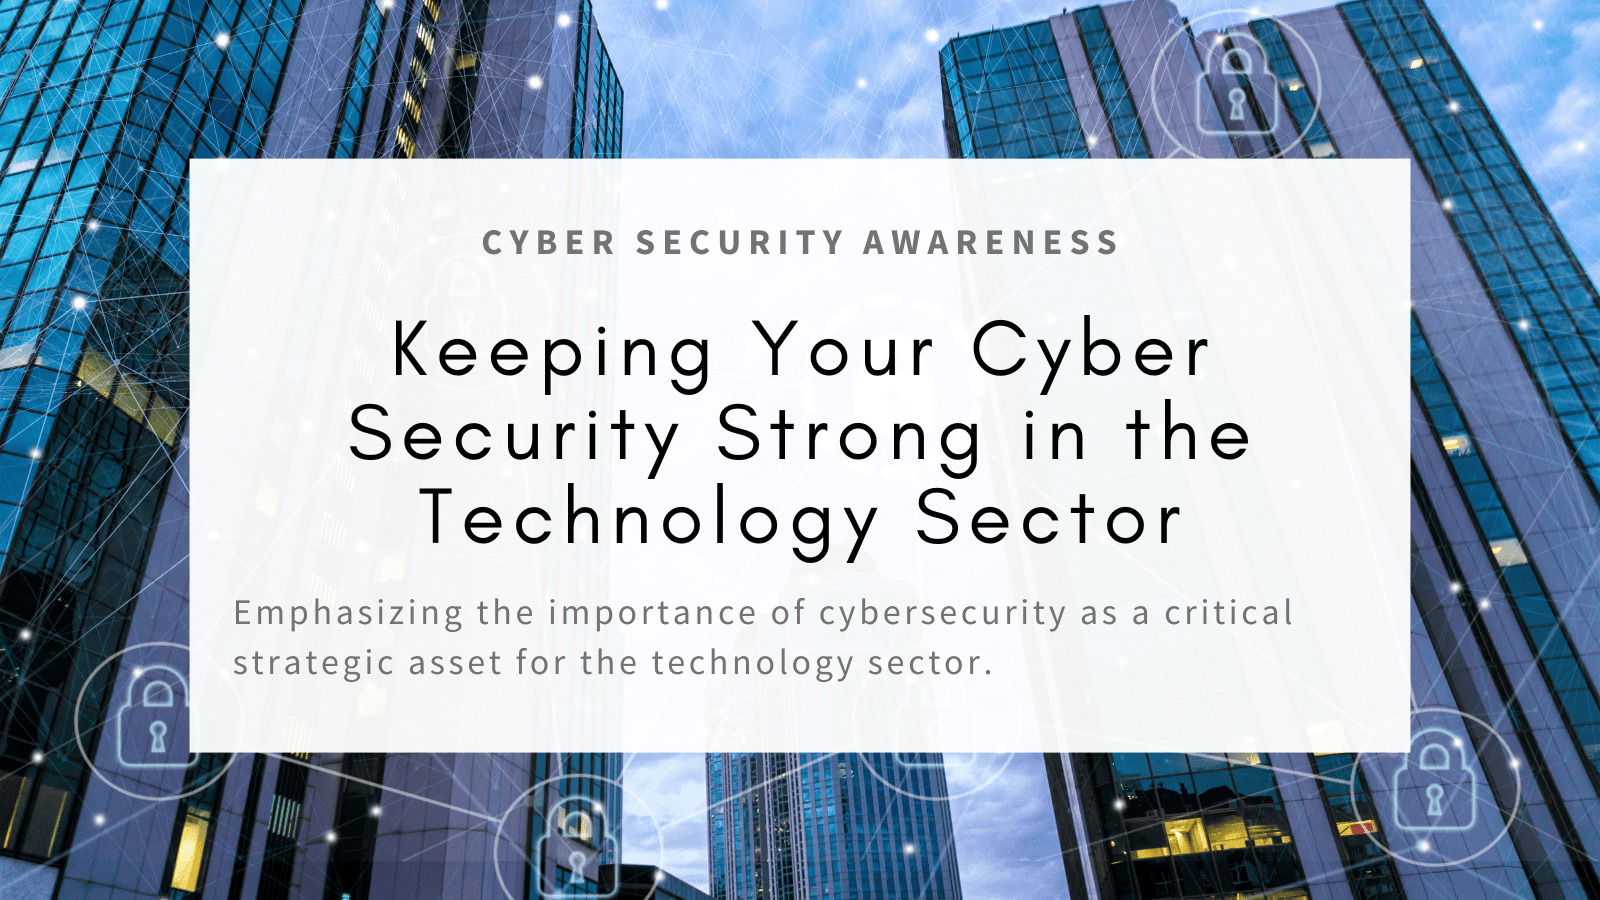 Keeping Your Cyber Security Strong in the Technology Sector